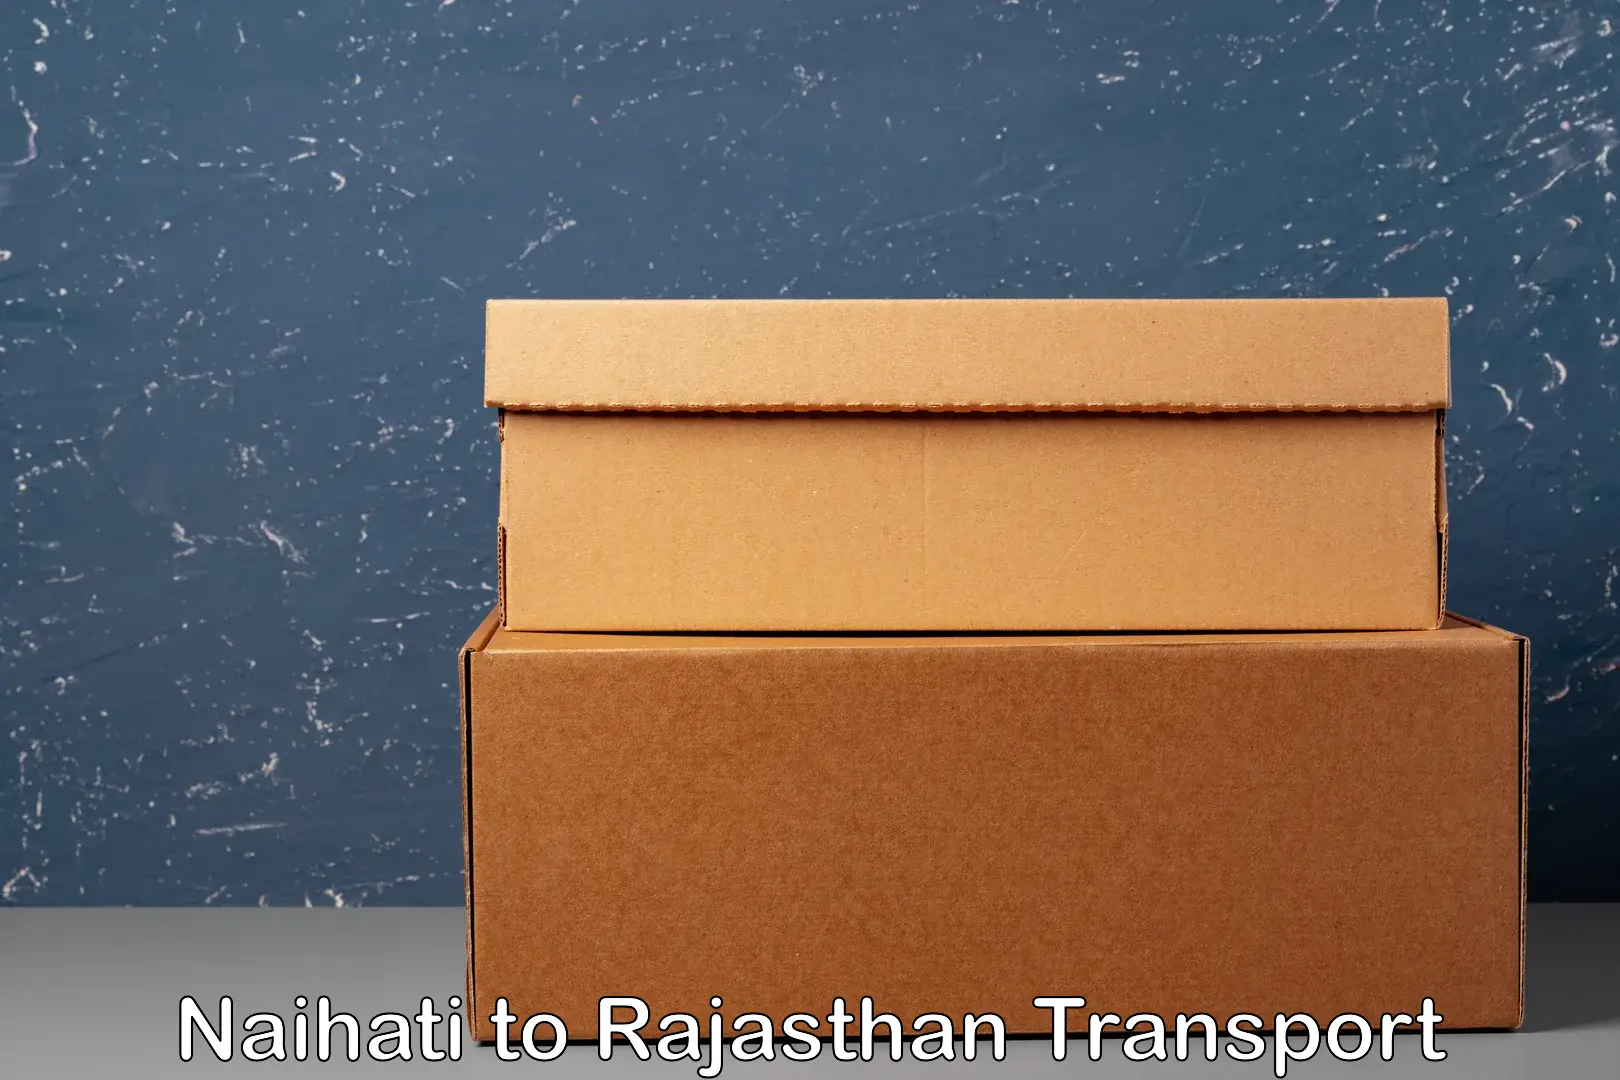 Nearby transport service Naihati to Rajasthan